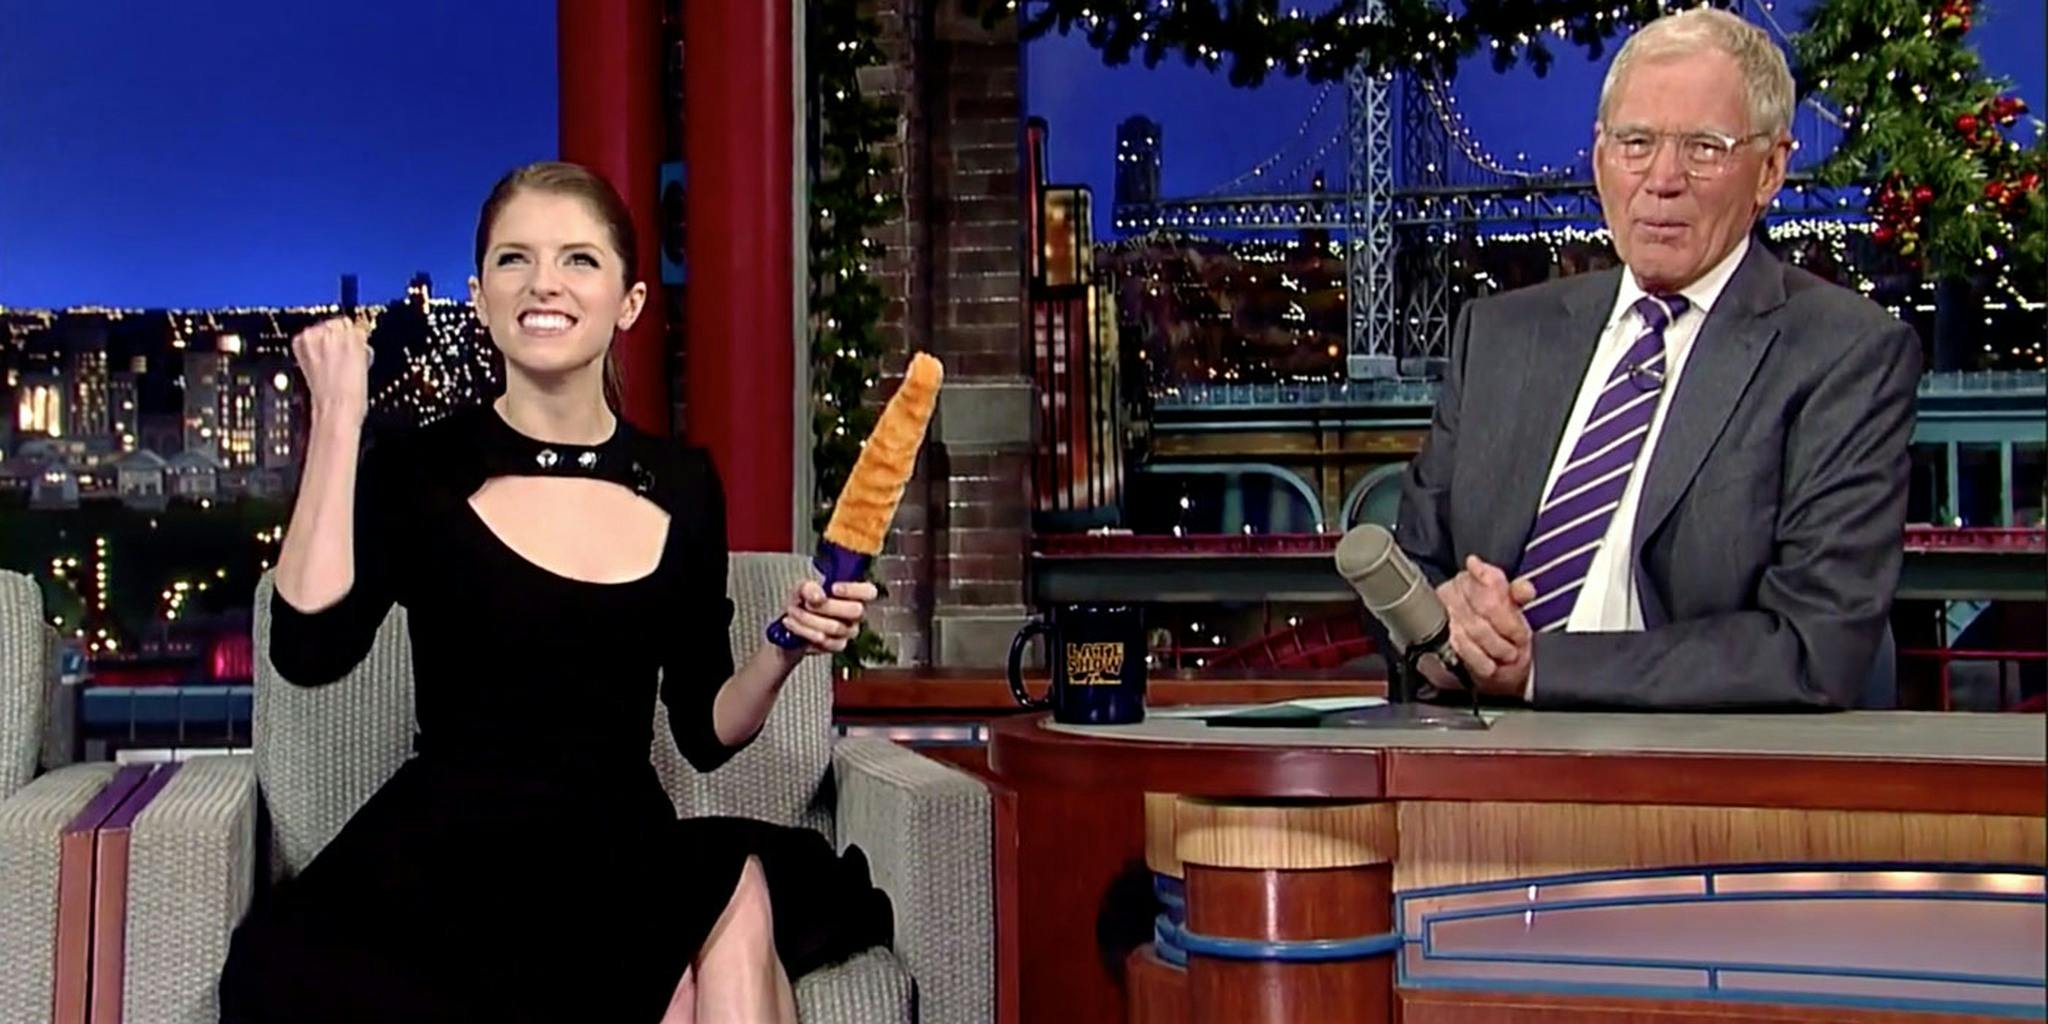 Anna Kendrick thinks David Letterman’s cat toy is something NSFW